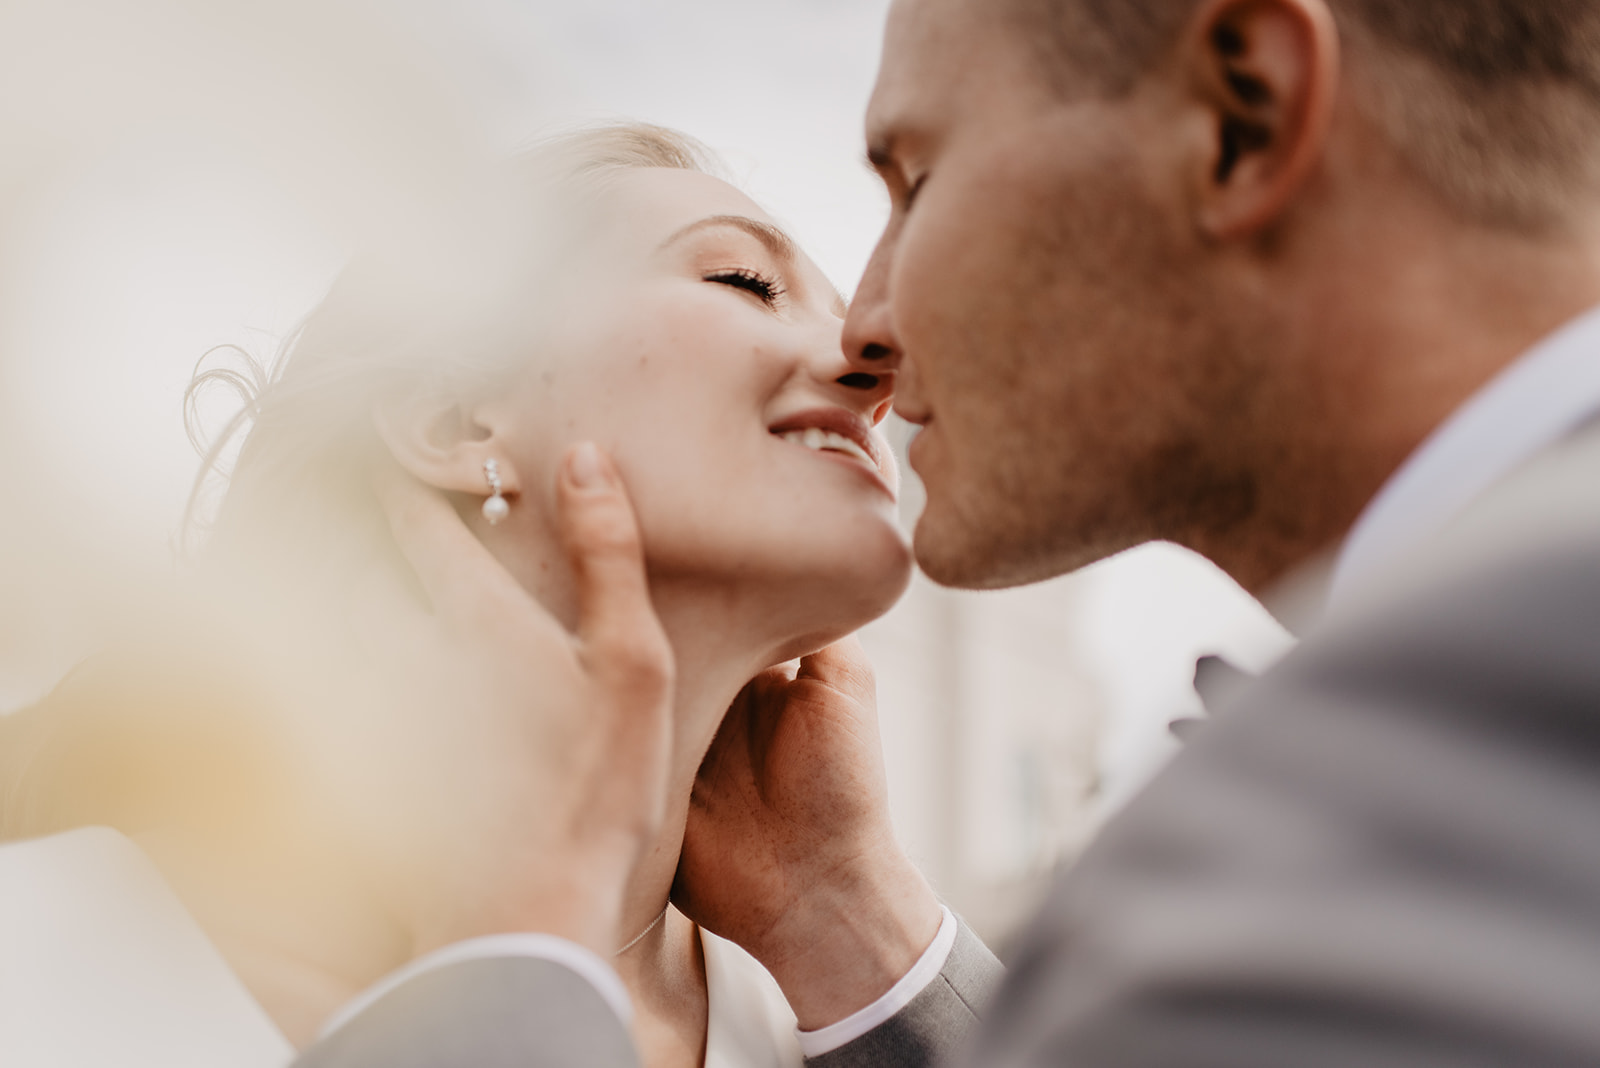 close up image of bride smiling as her groom holds her jaw lightly and leans into a kiss with glimer of sunlight coming through behind them